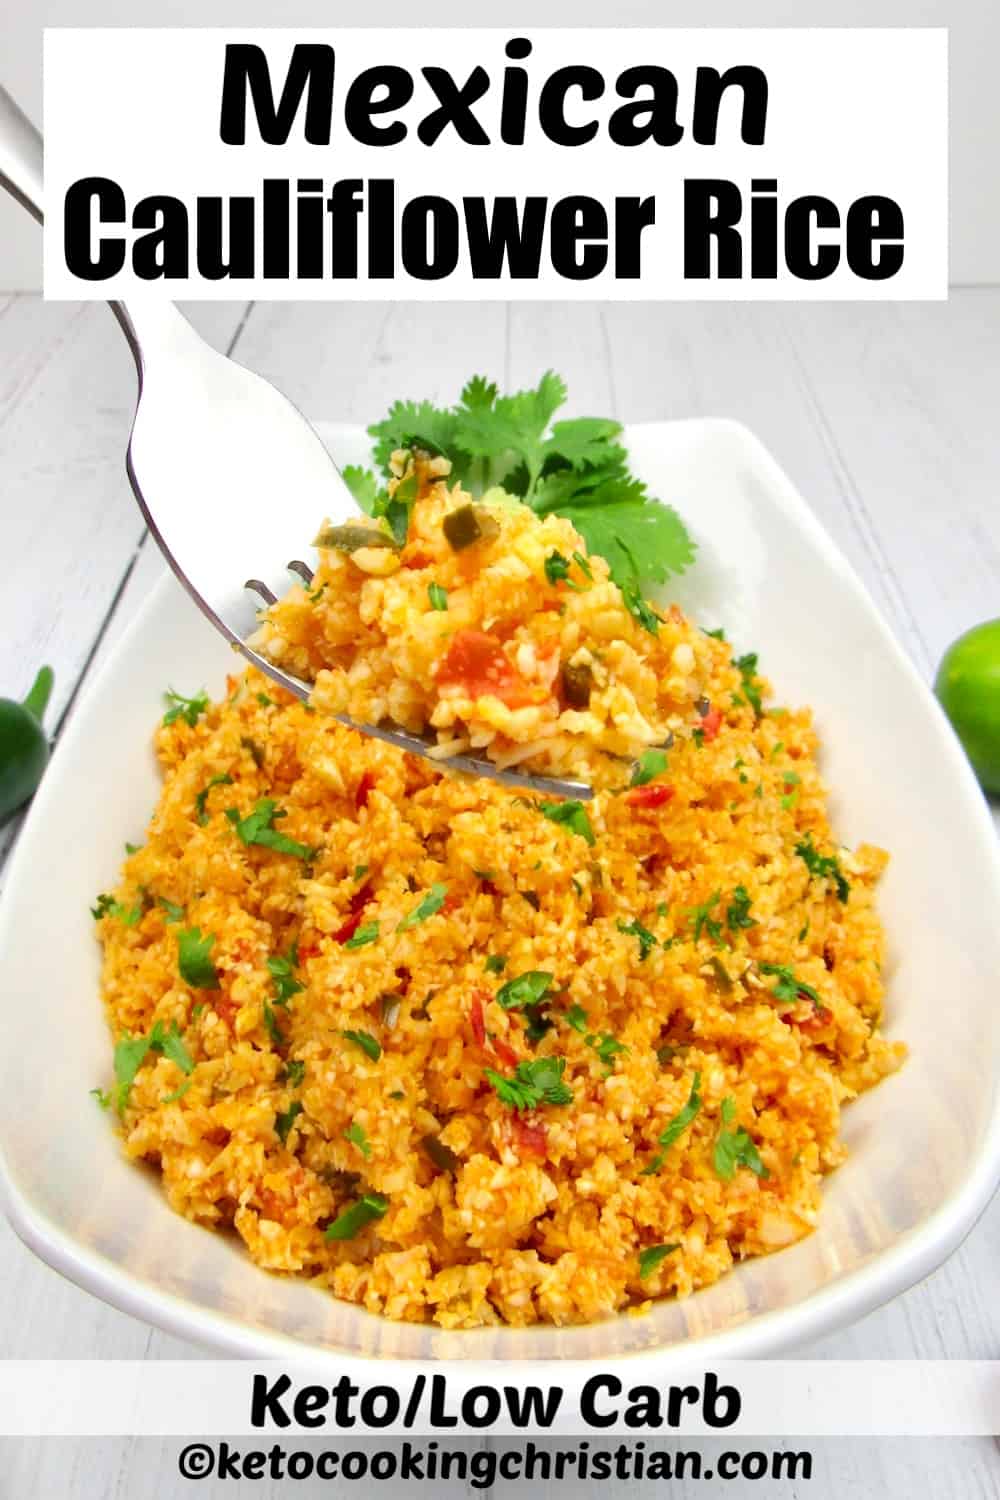 Mexican cauliflower rice in white bowl with fork lifting up some